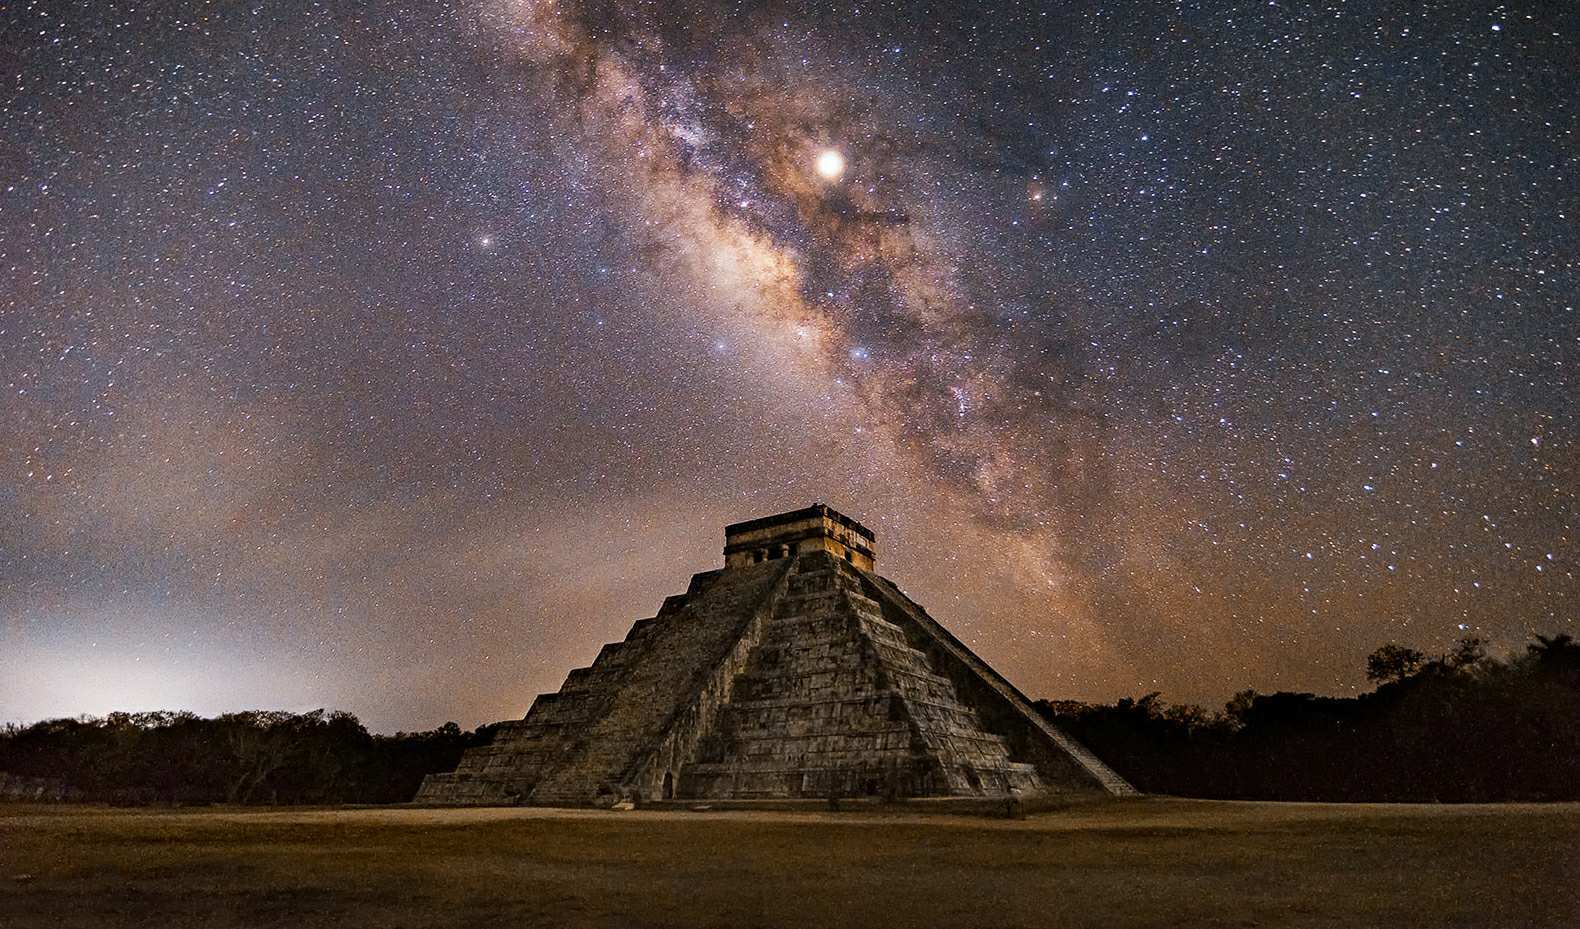 Were the Mayans visited by ancient astronauts? 1